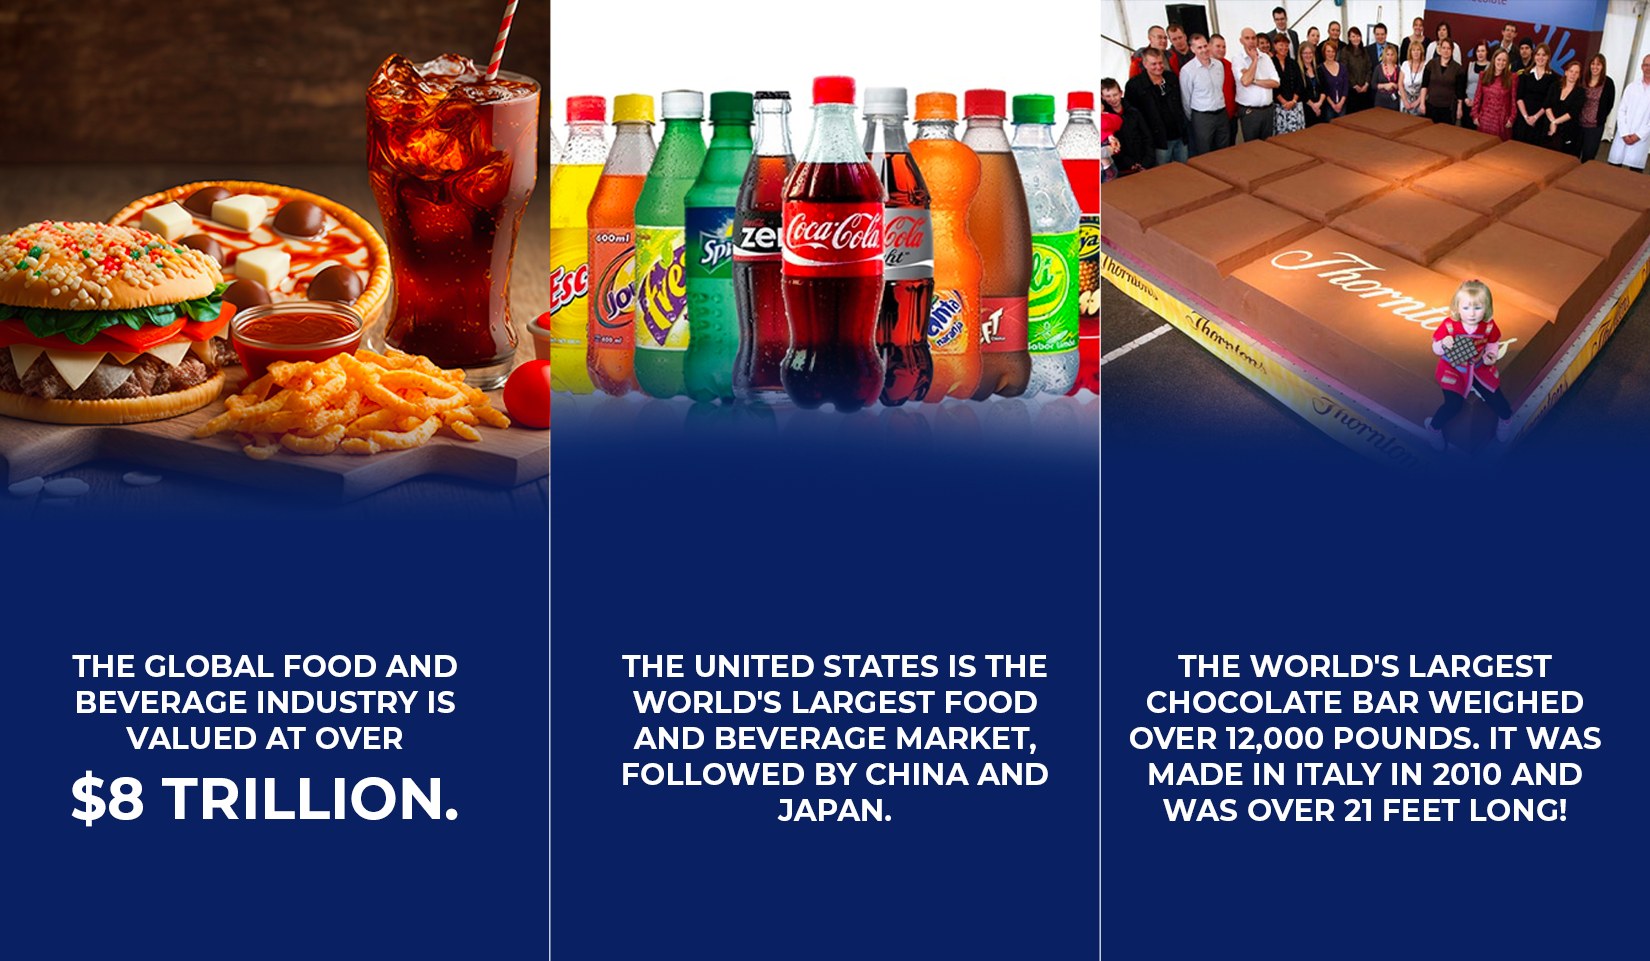 Did you know facts on the food and beverage industry